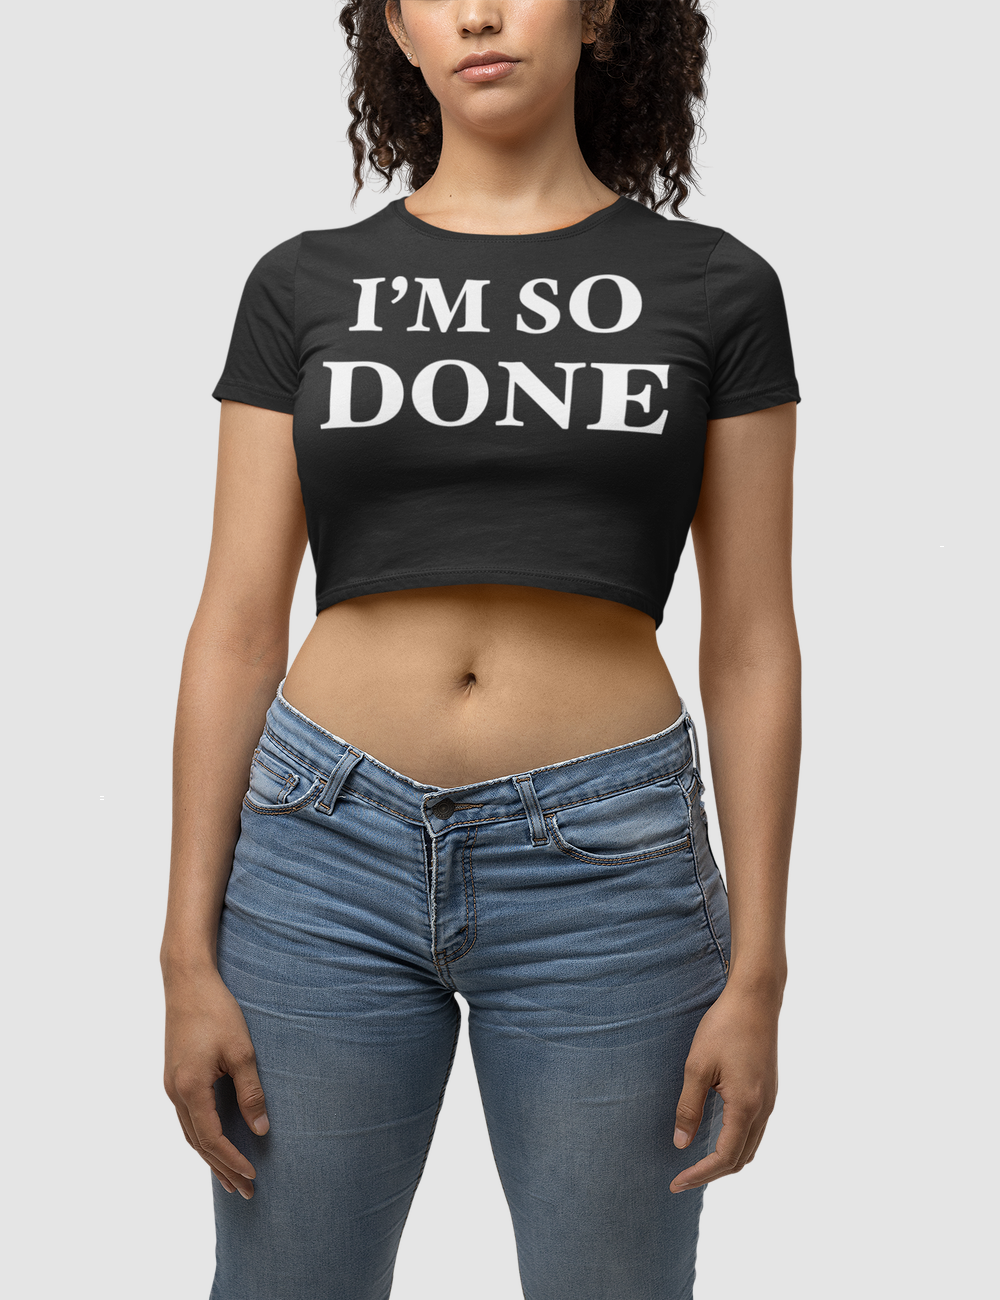 I'm So Done Women's Fitted Crop Top T-Shirt OniTakai